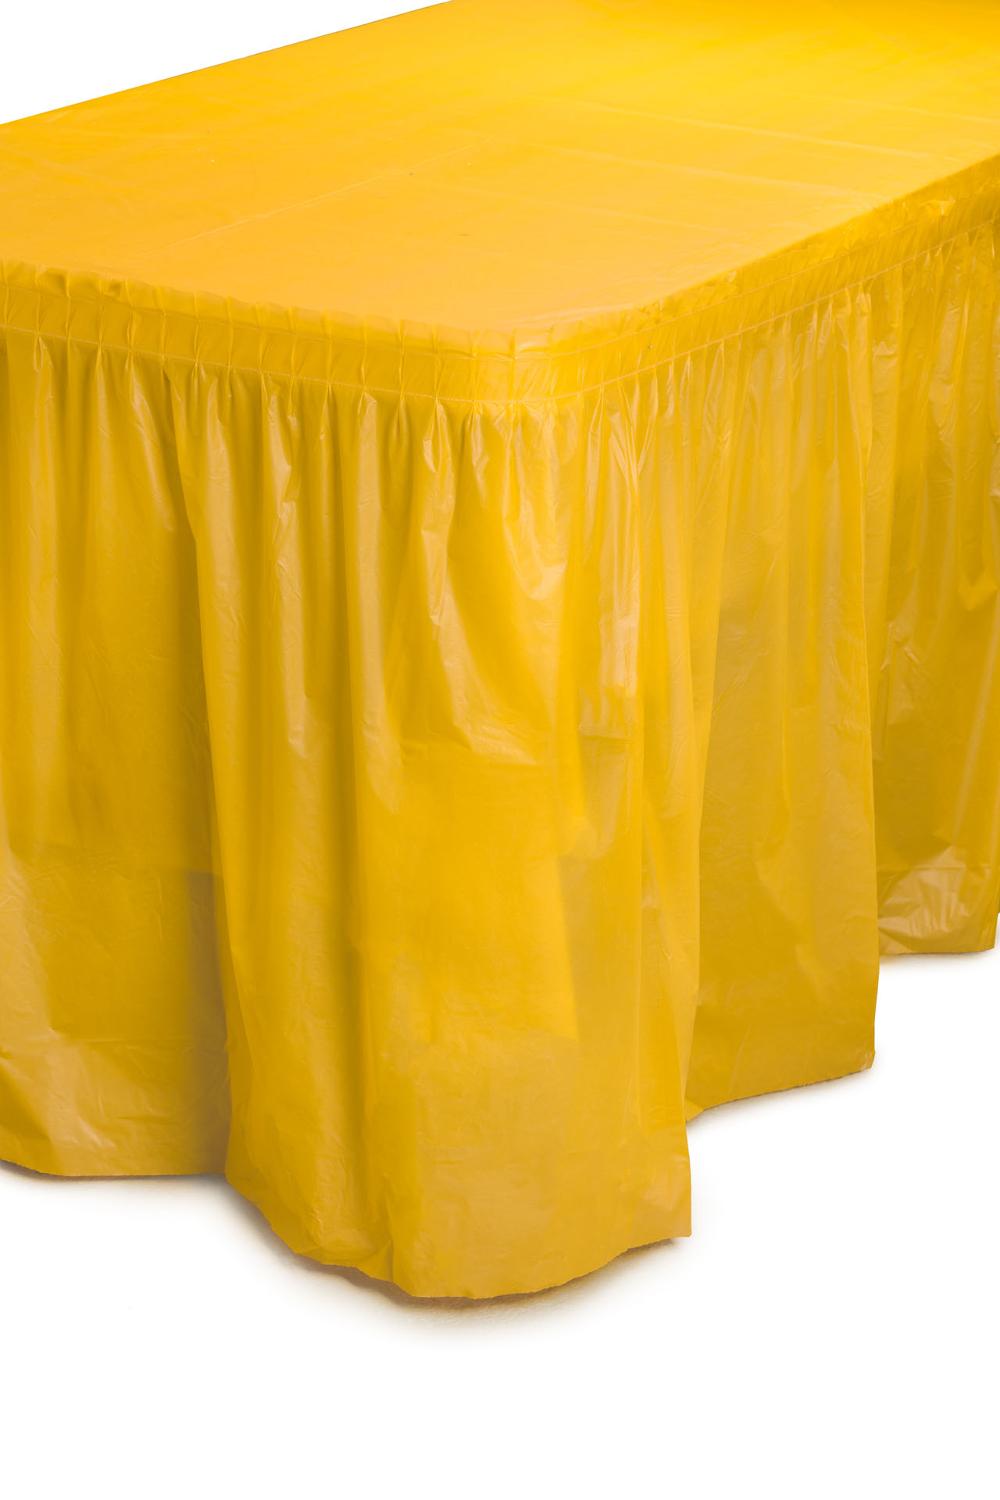 96 Length x 29 Width Party Essentials 2908 Plastic Table Skirt Case of 6 Yellow 